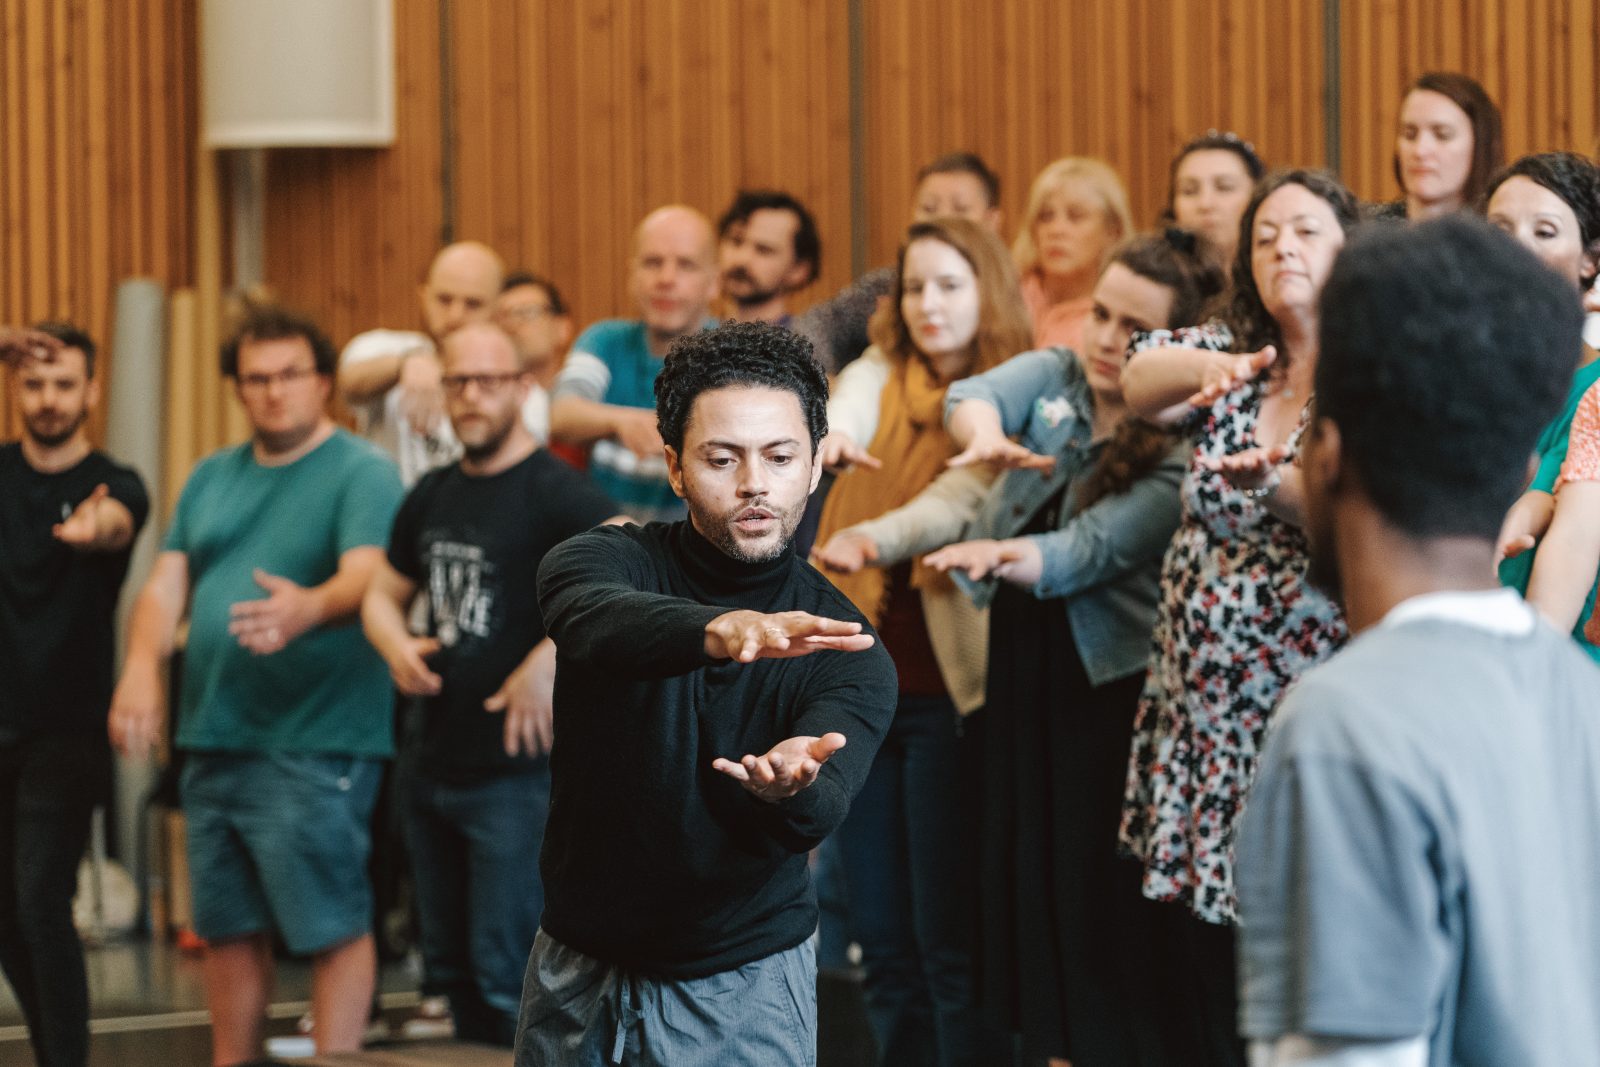 Choreographer Dane Hurst works with the Chorus of Opera North in rehearsal for Requiem.